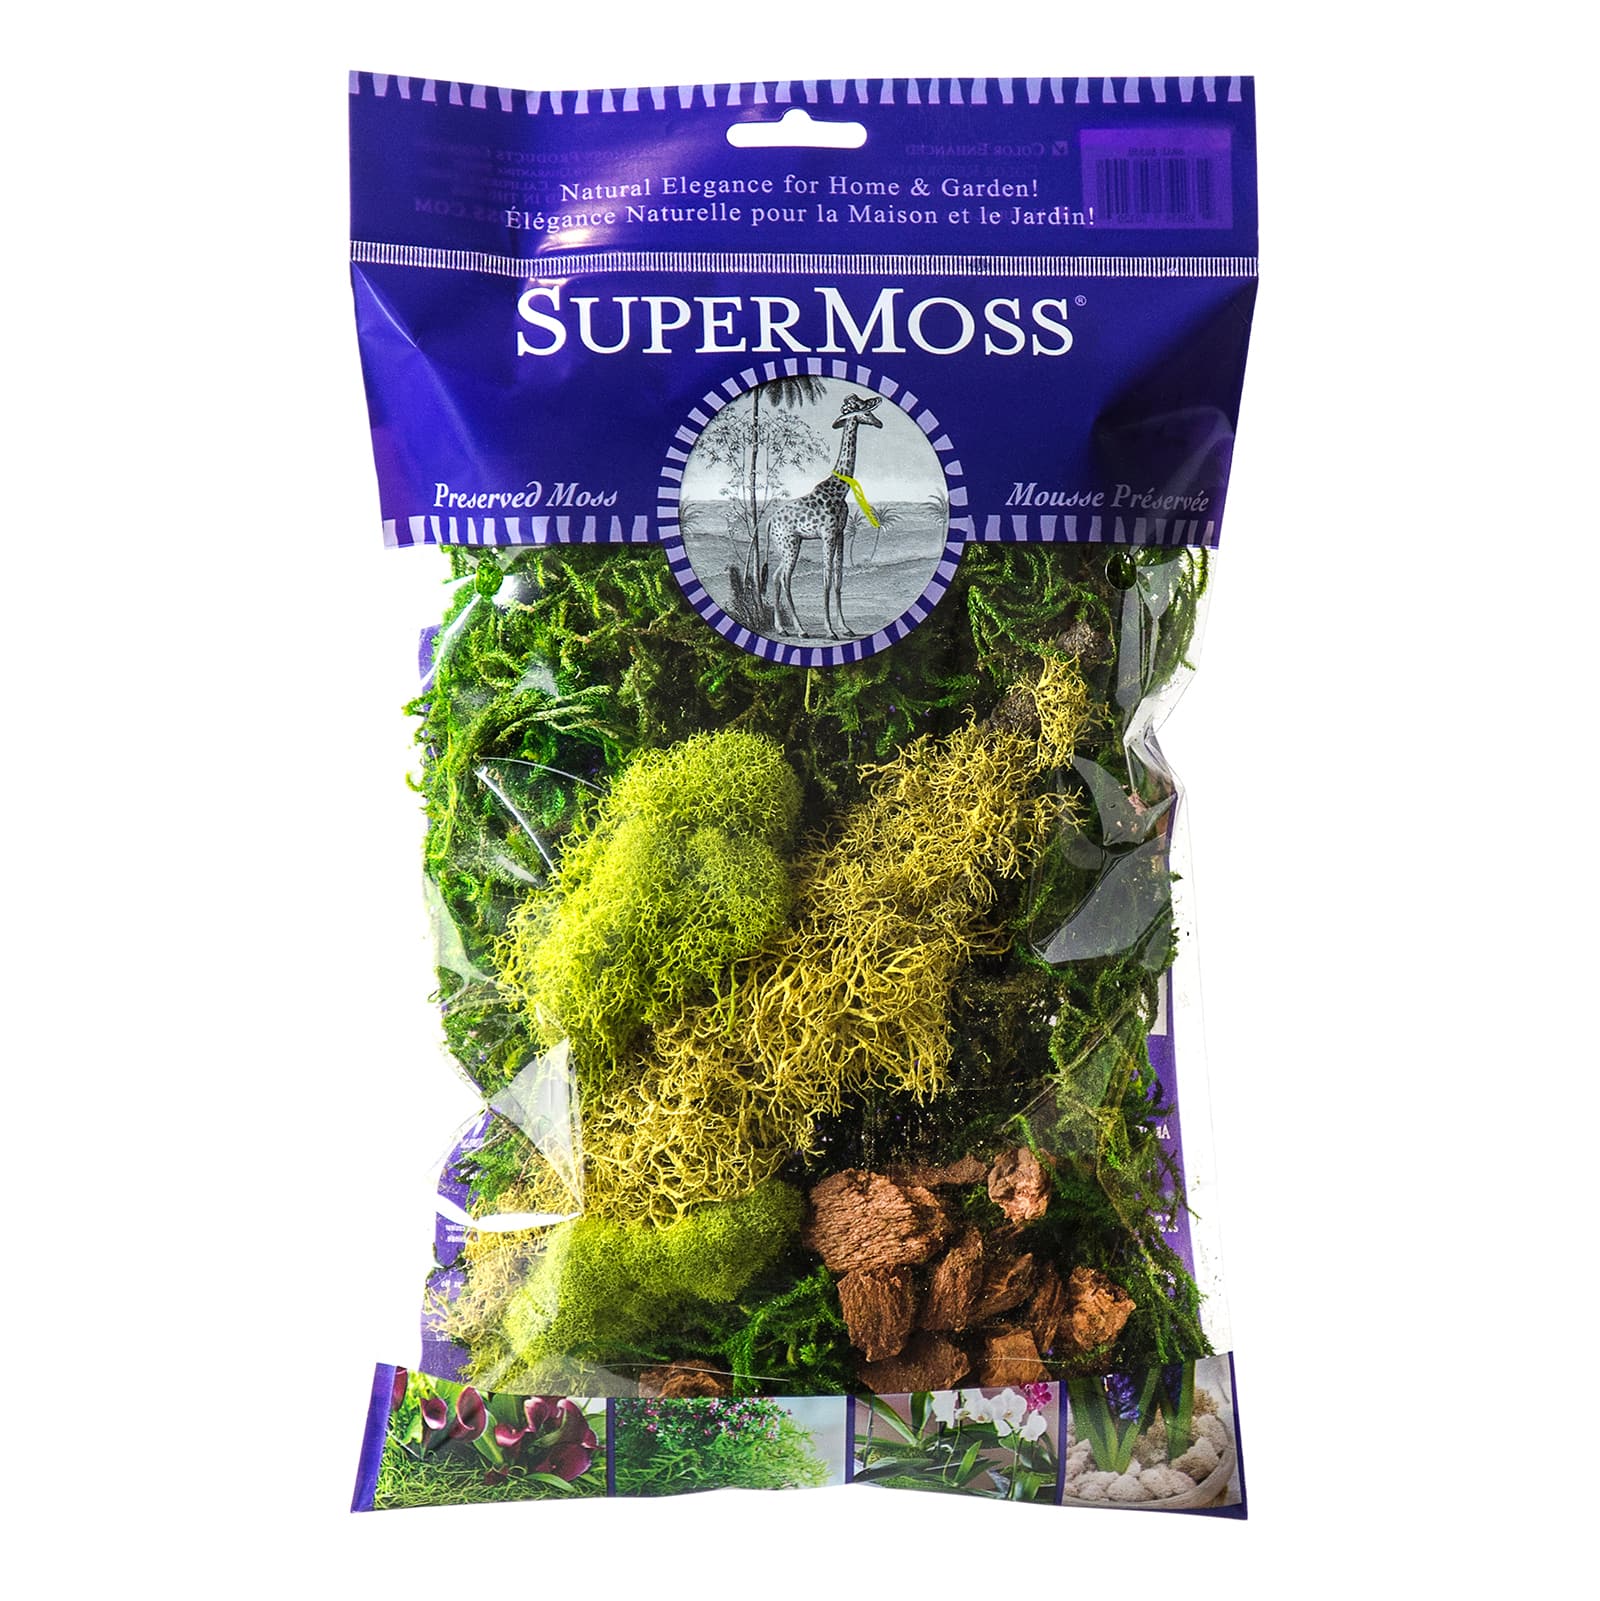 SuperMoss  Buy Moss, Hanging Baskets, and Floral Accessories Online!